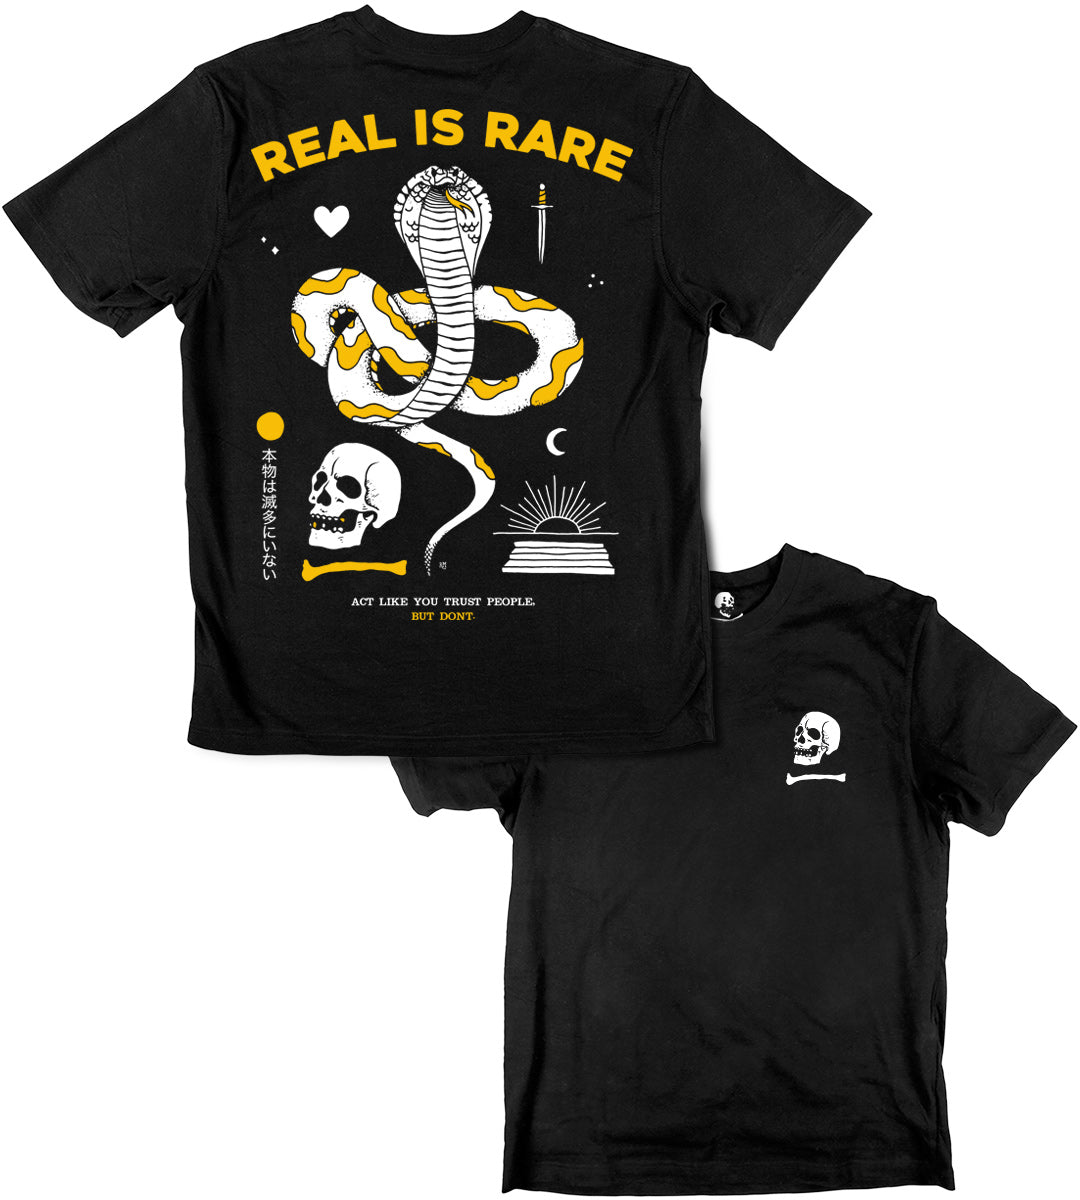 REAL IS RARE